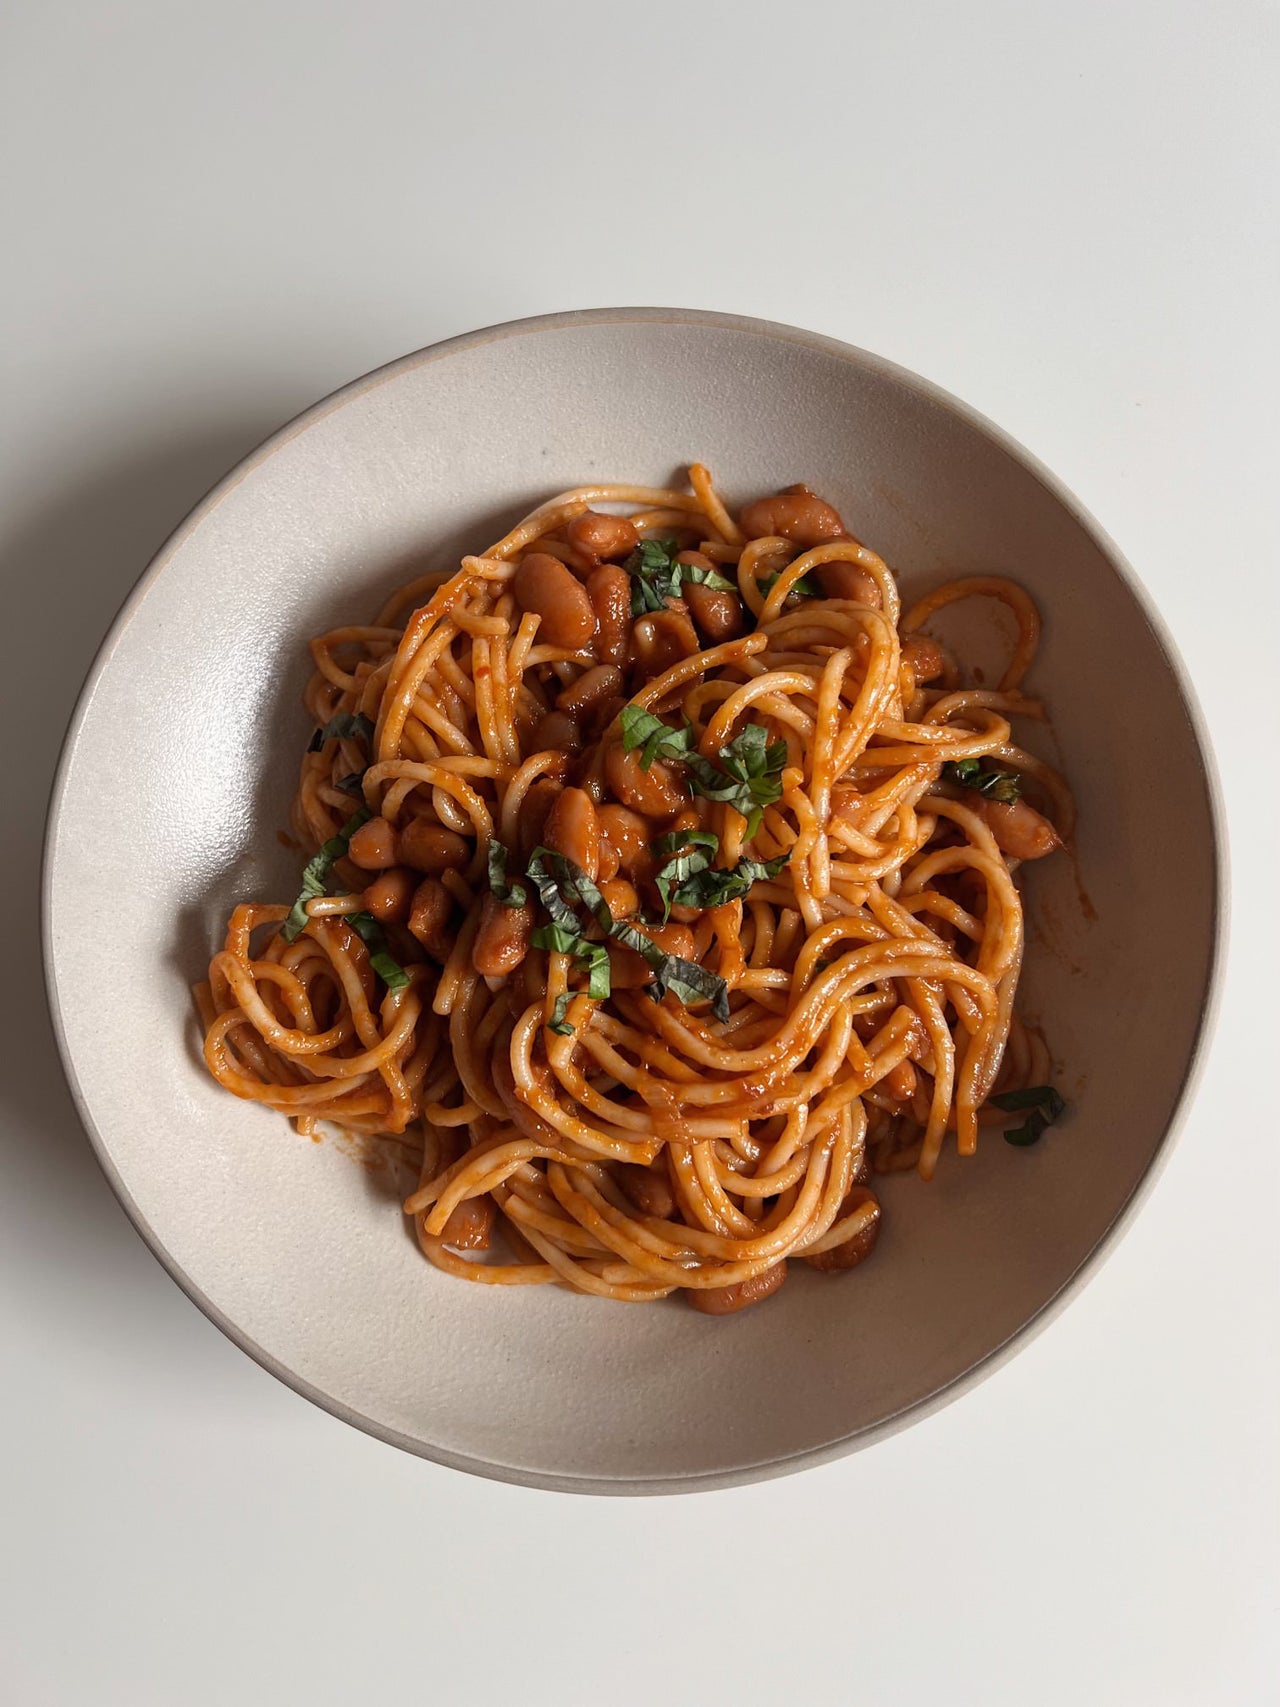 Chelsea Crane for Heyday: Red Wine Spaghetti with Cannellini Beans & Ami Ami Mulled Wine